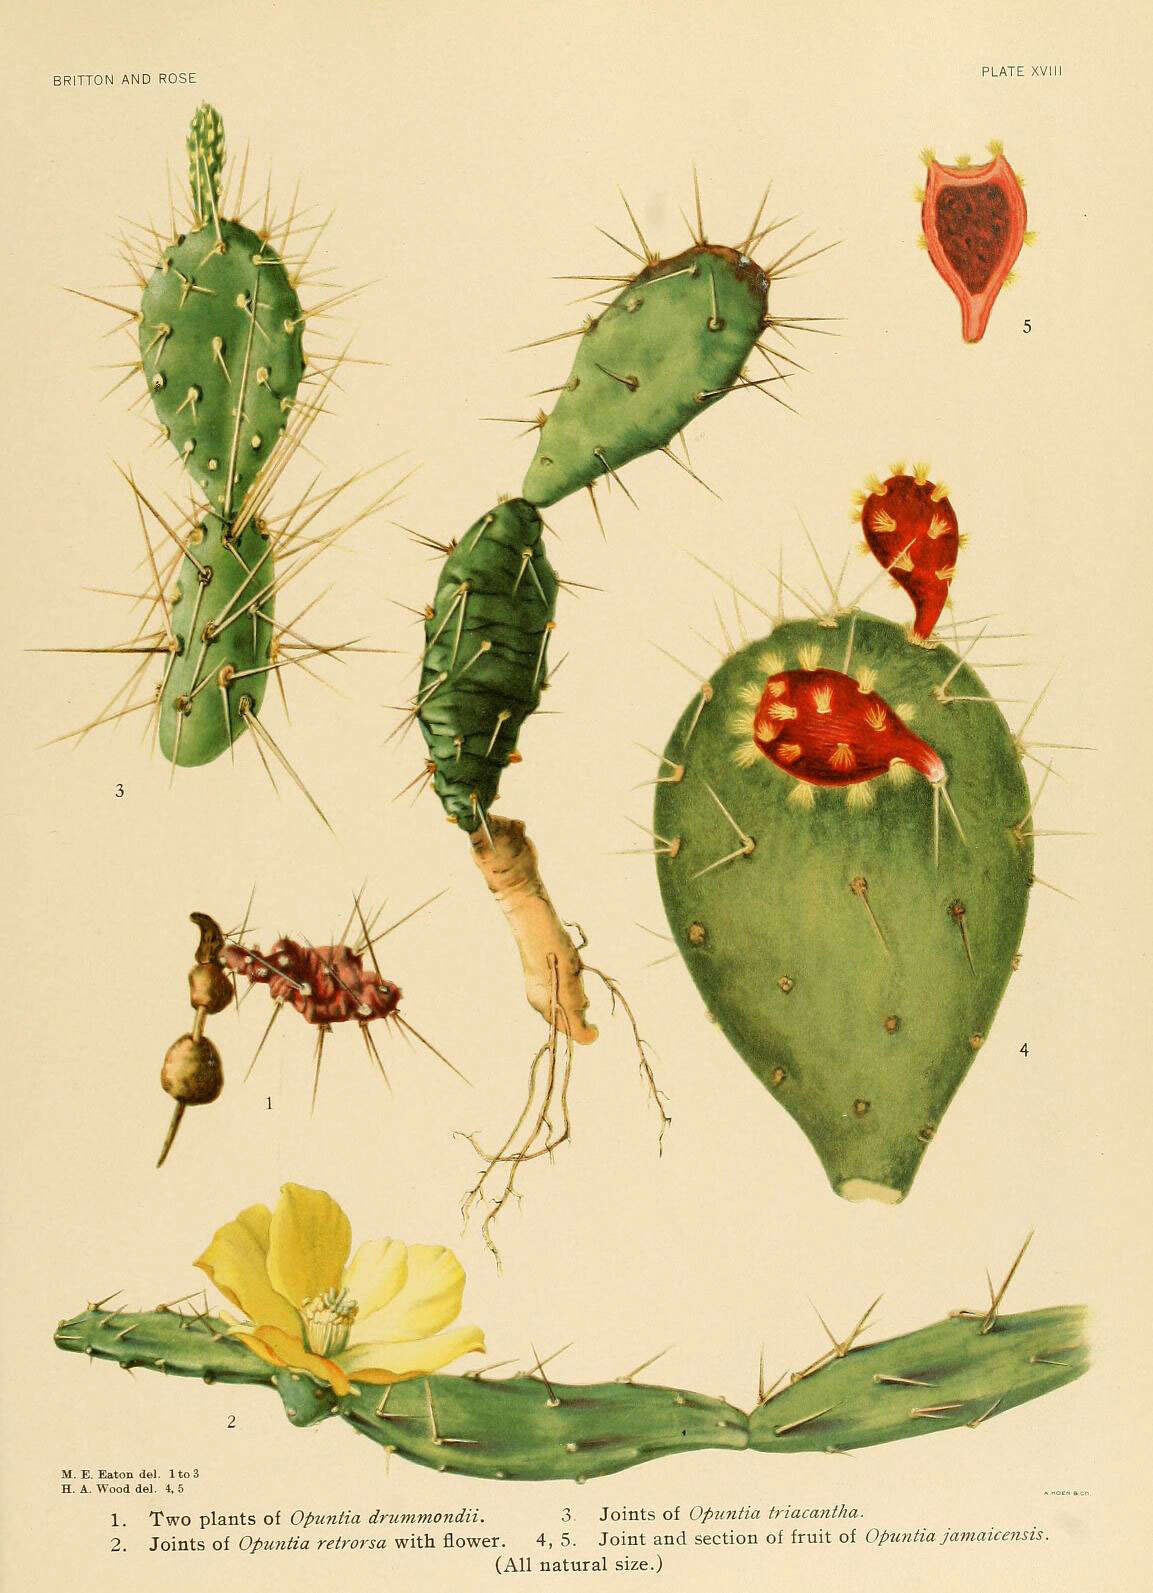 Image of Little Priclly-pear Cactus